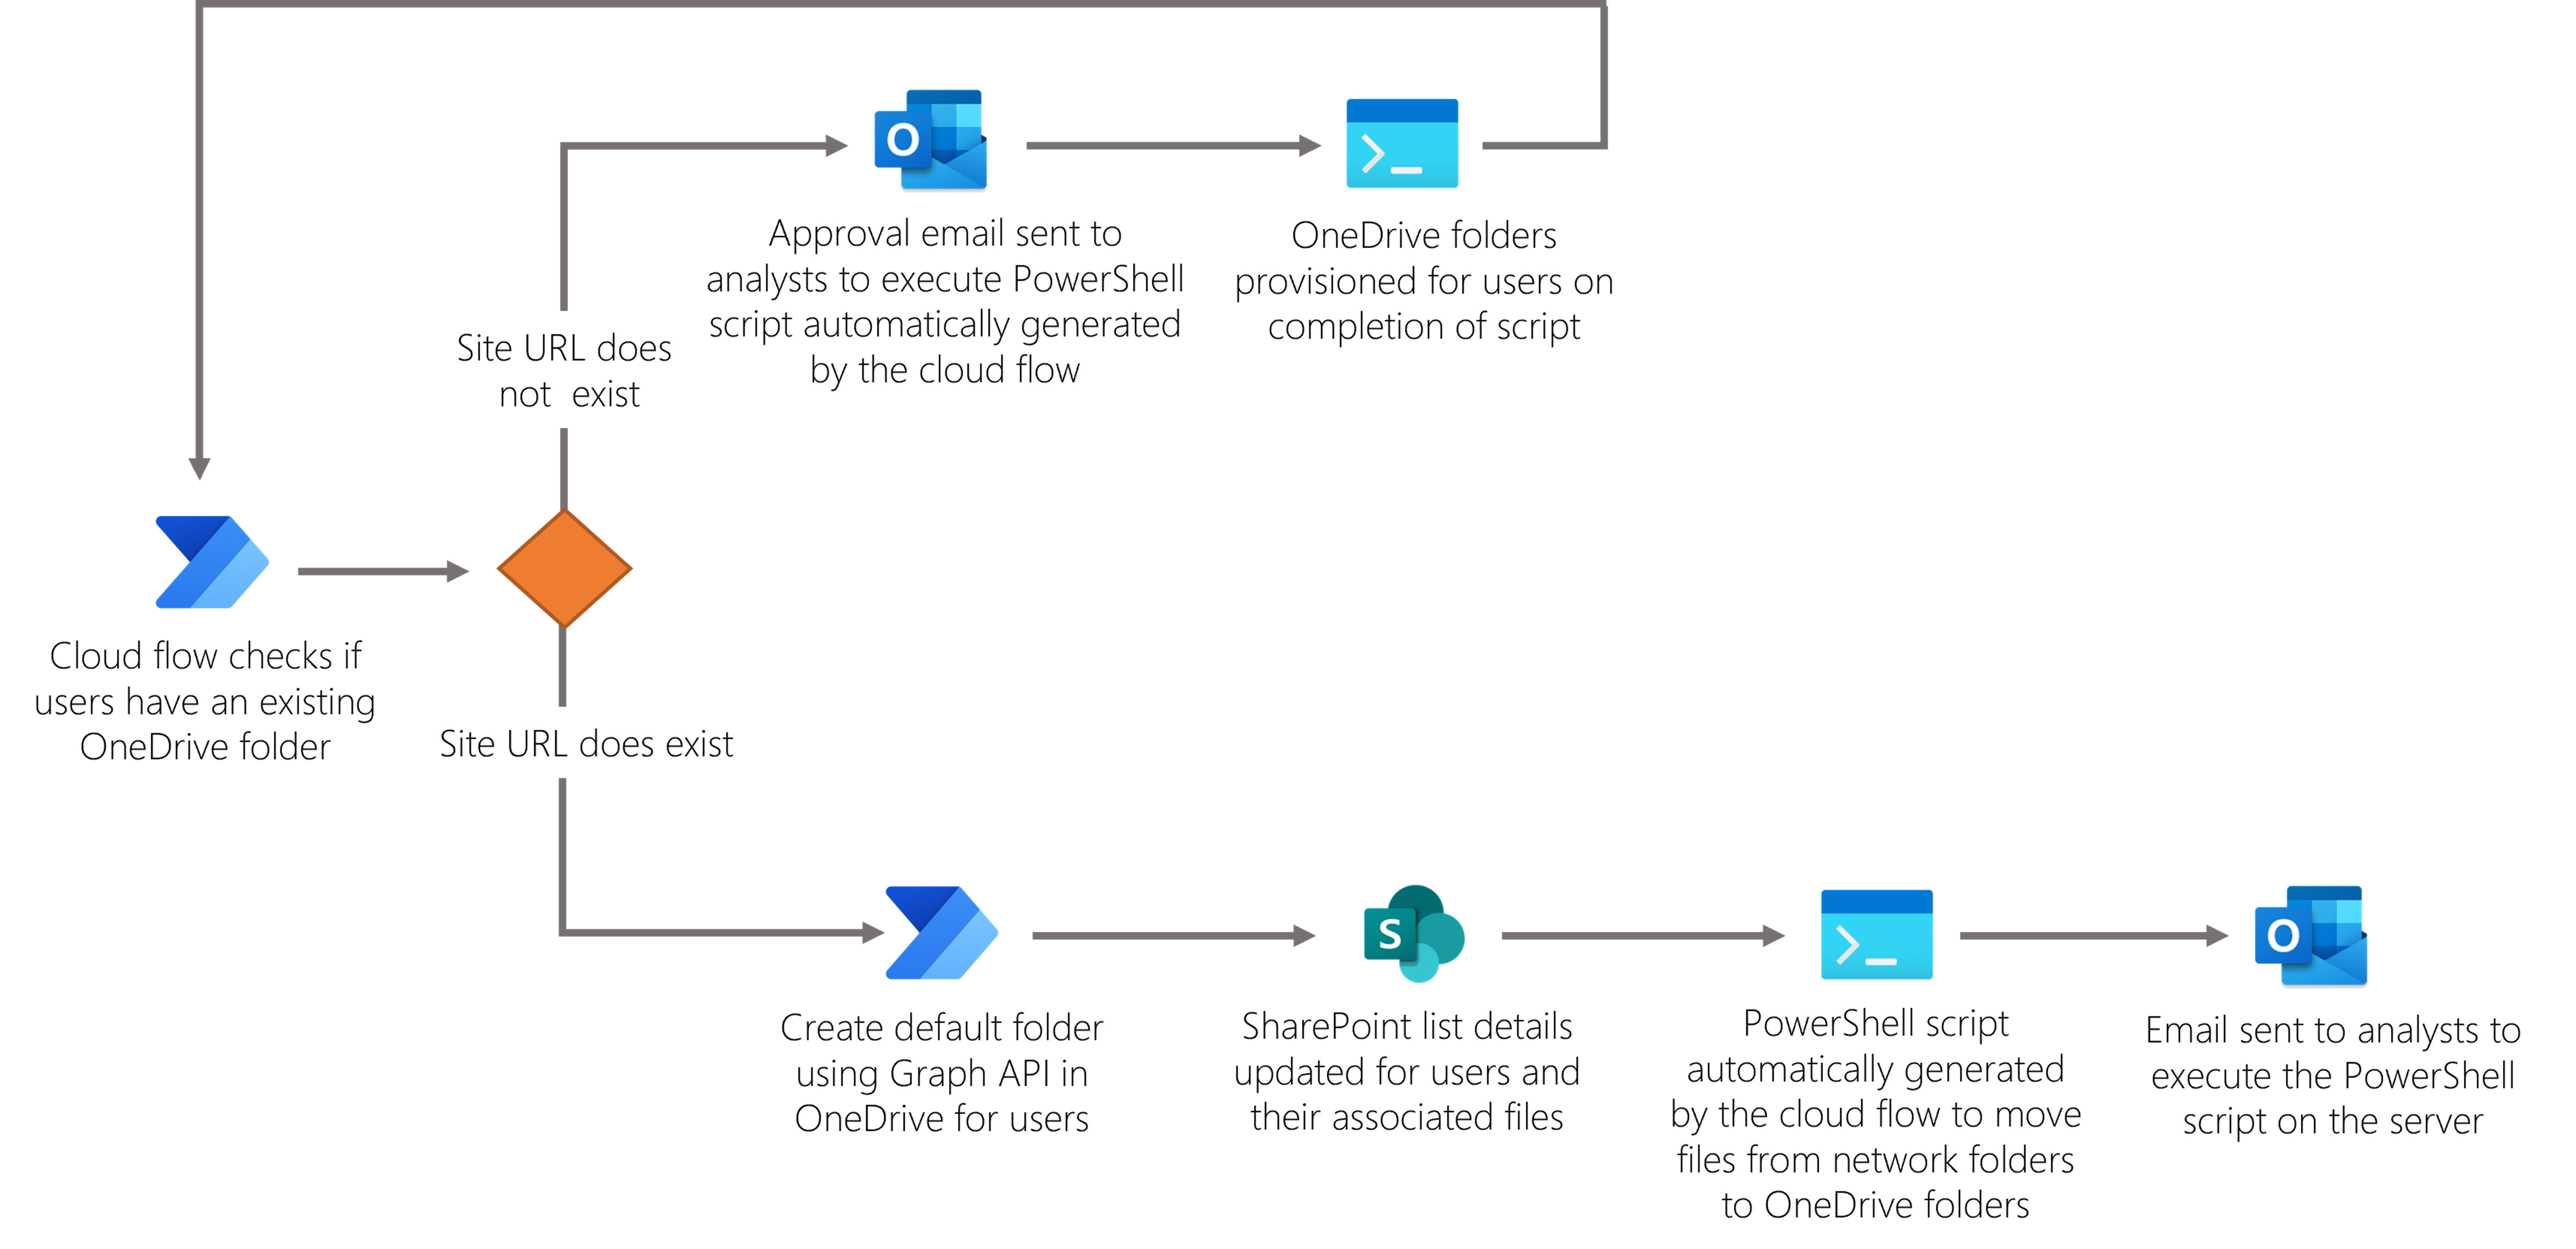 The cloud flow utilizes Microsoft Graph API and intelligently creates PowerShell scripts where relevant for the migration of files to OneDrive for Business.